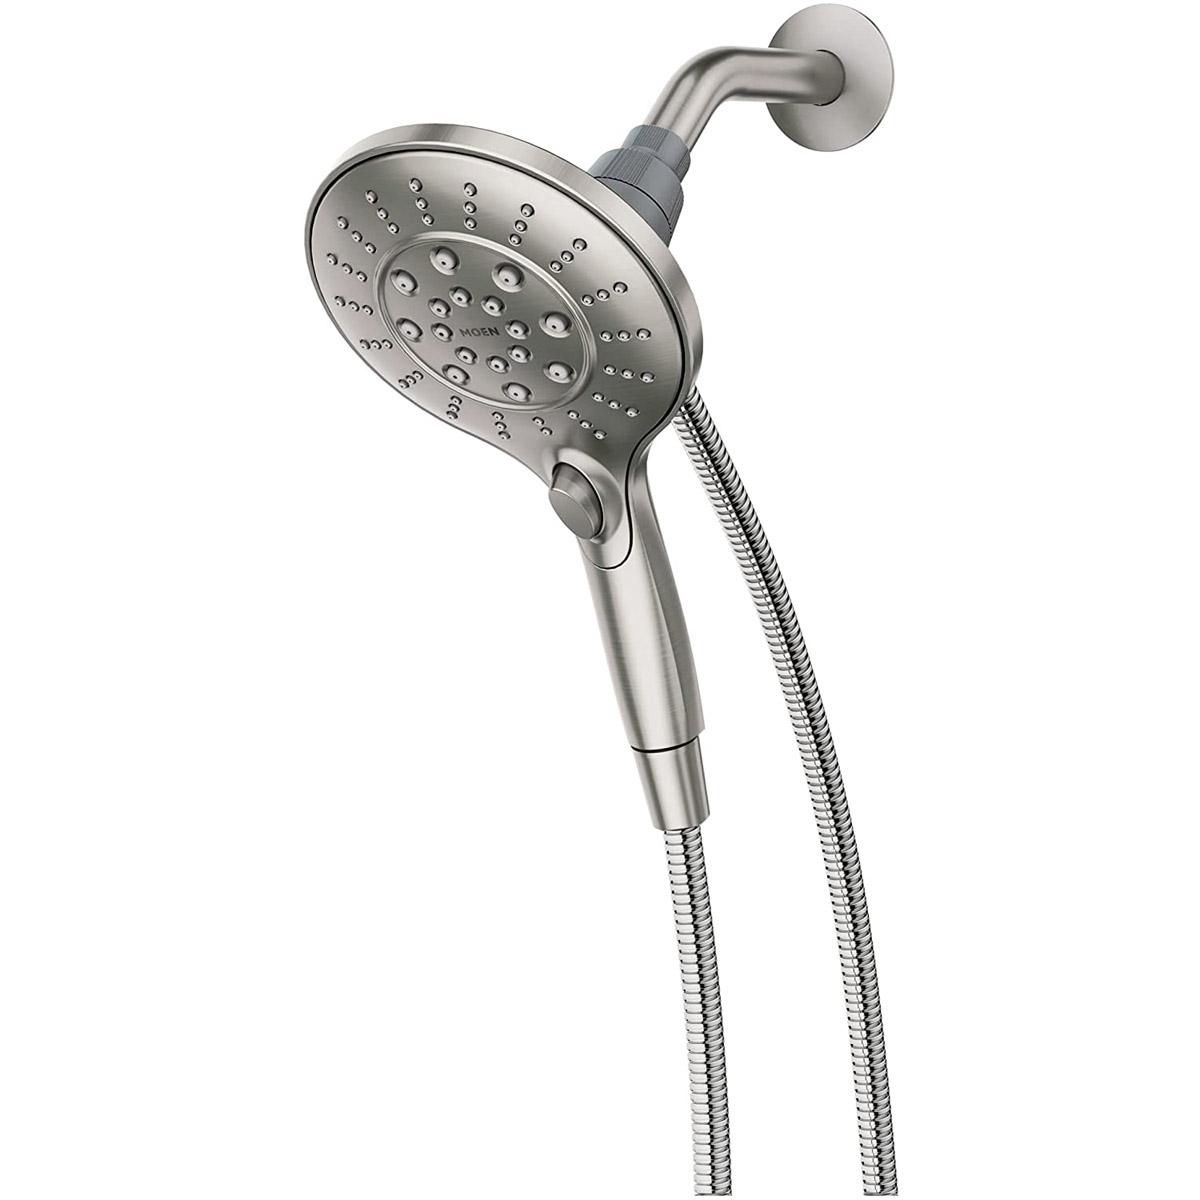 Moen Engage Magnetix 5.5in Handheld Showerhead for $22.83 Shipped